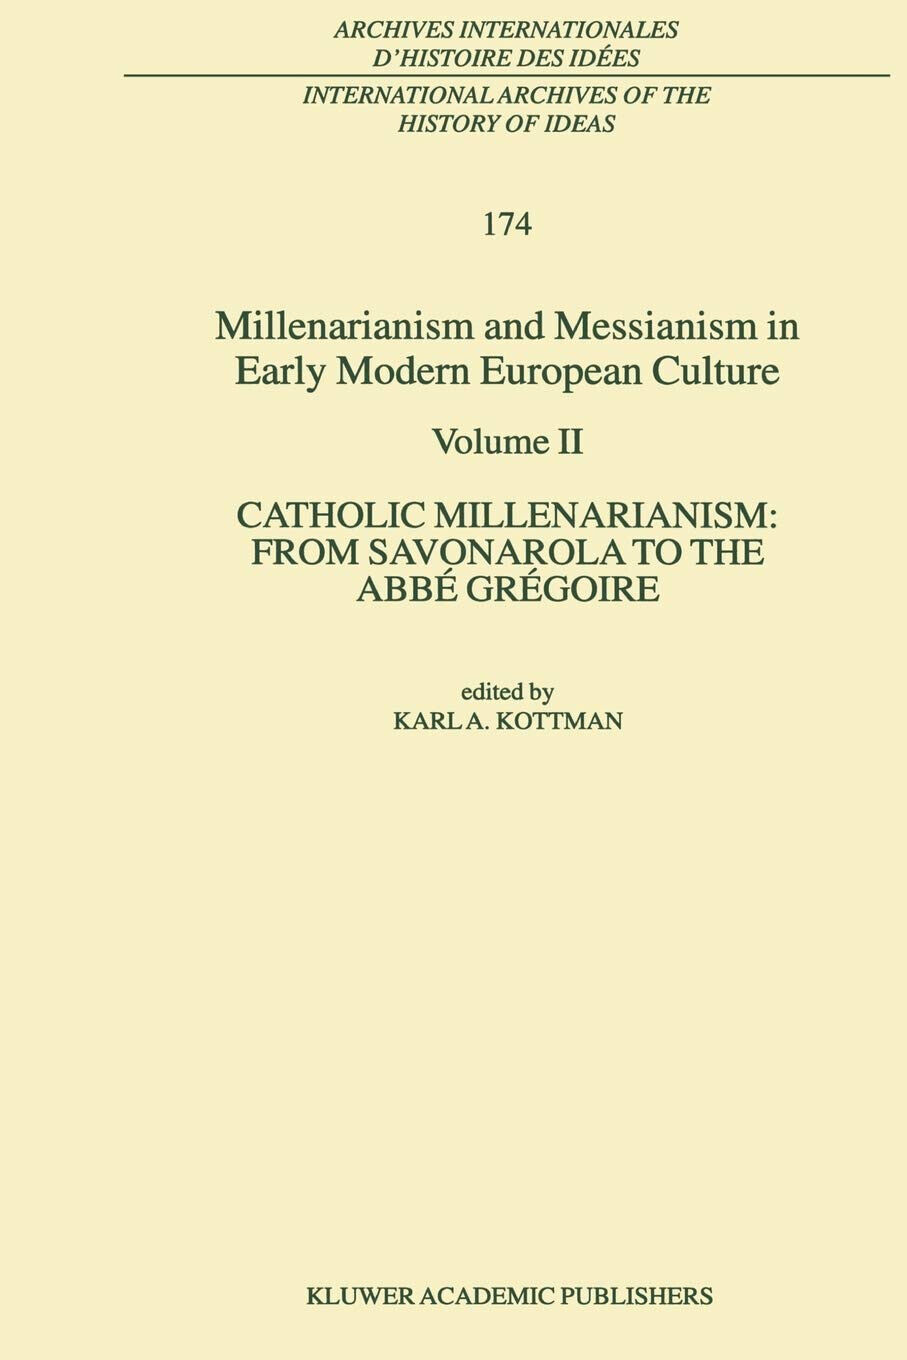 Millenarianism and Messianism in Early Modern European Culture. Volume II - 2010 libro usato